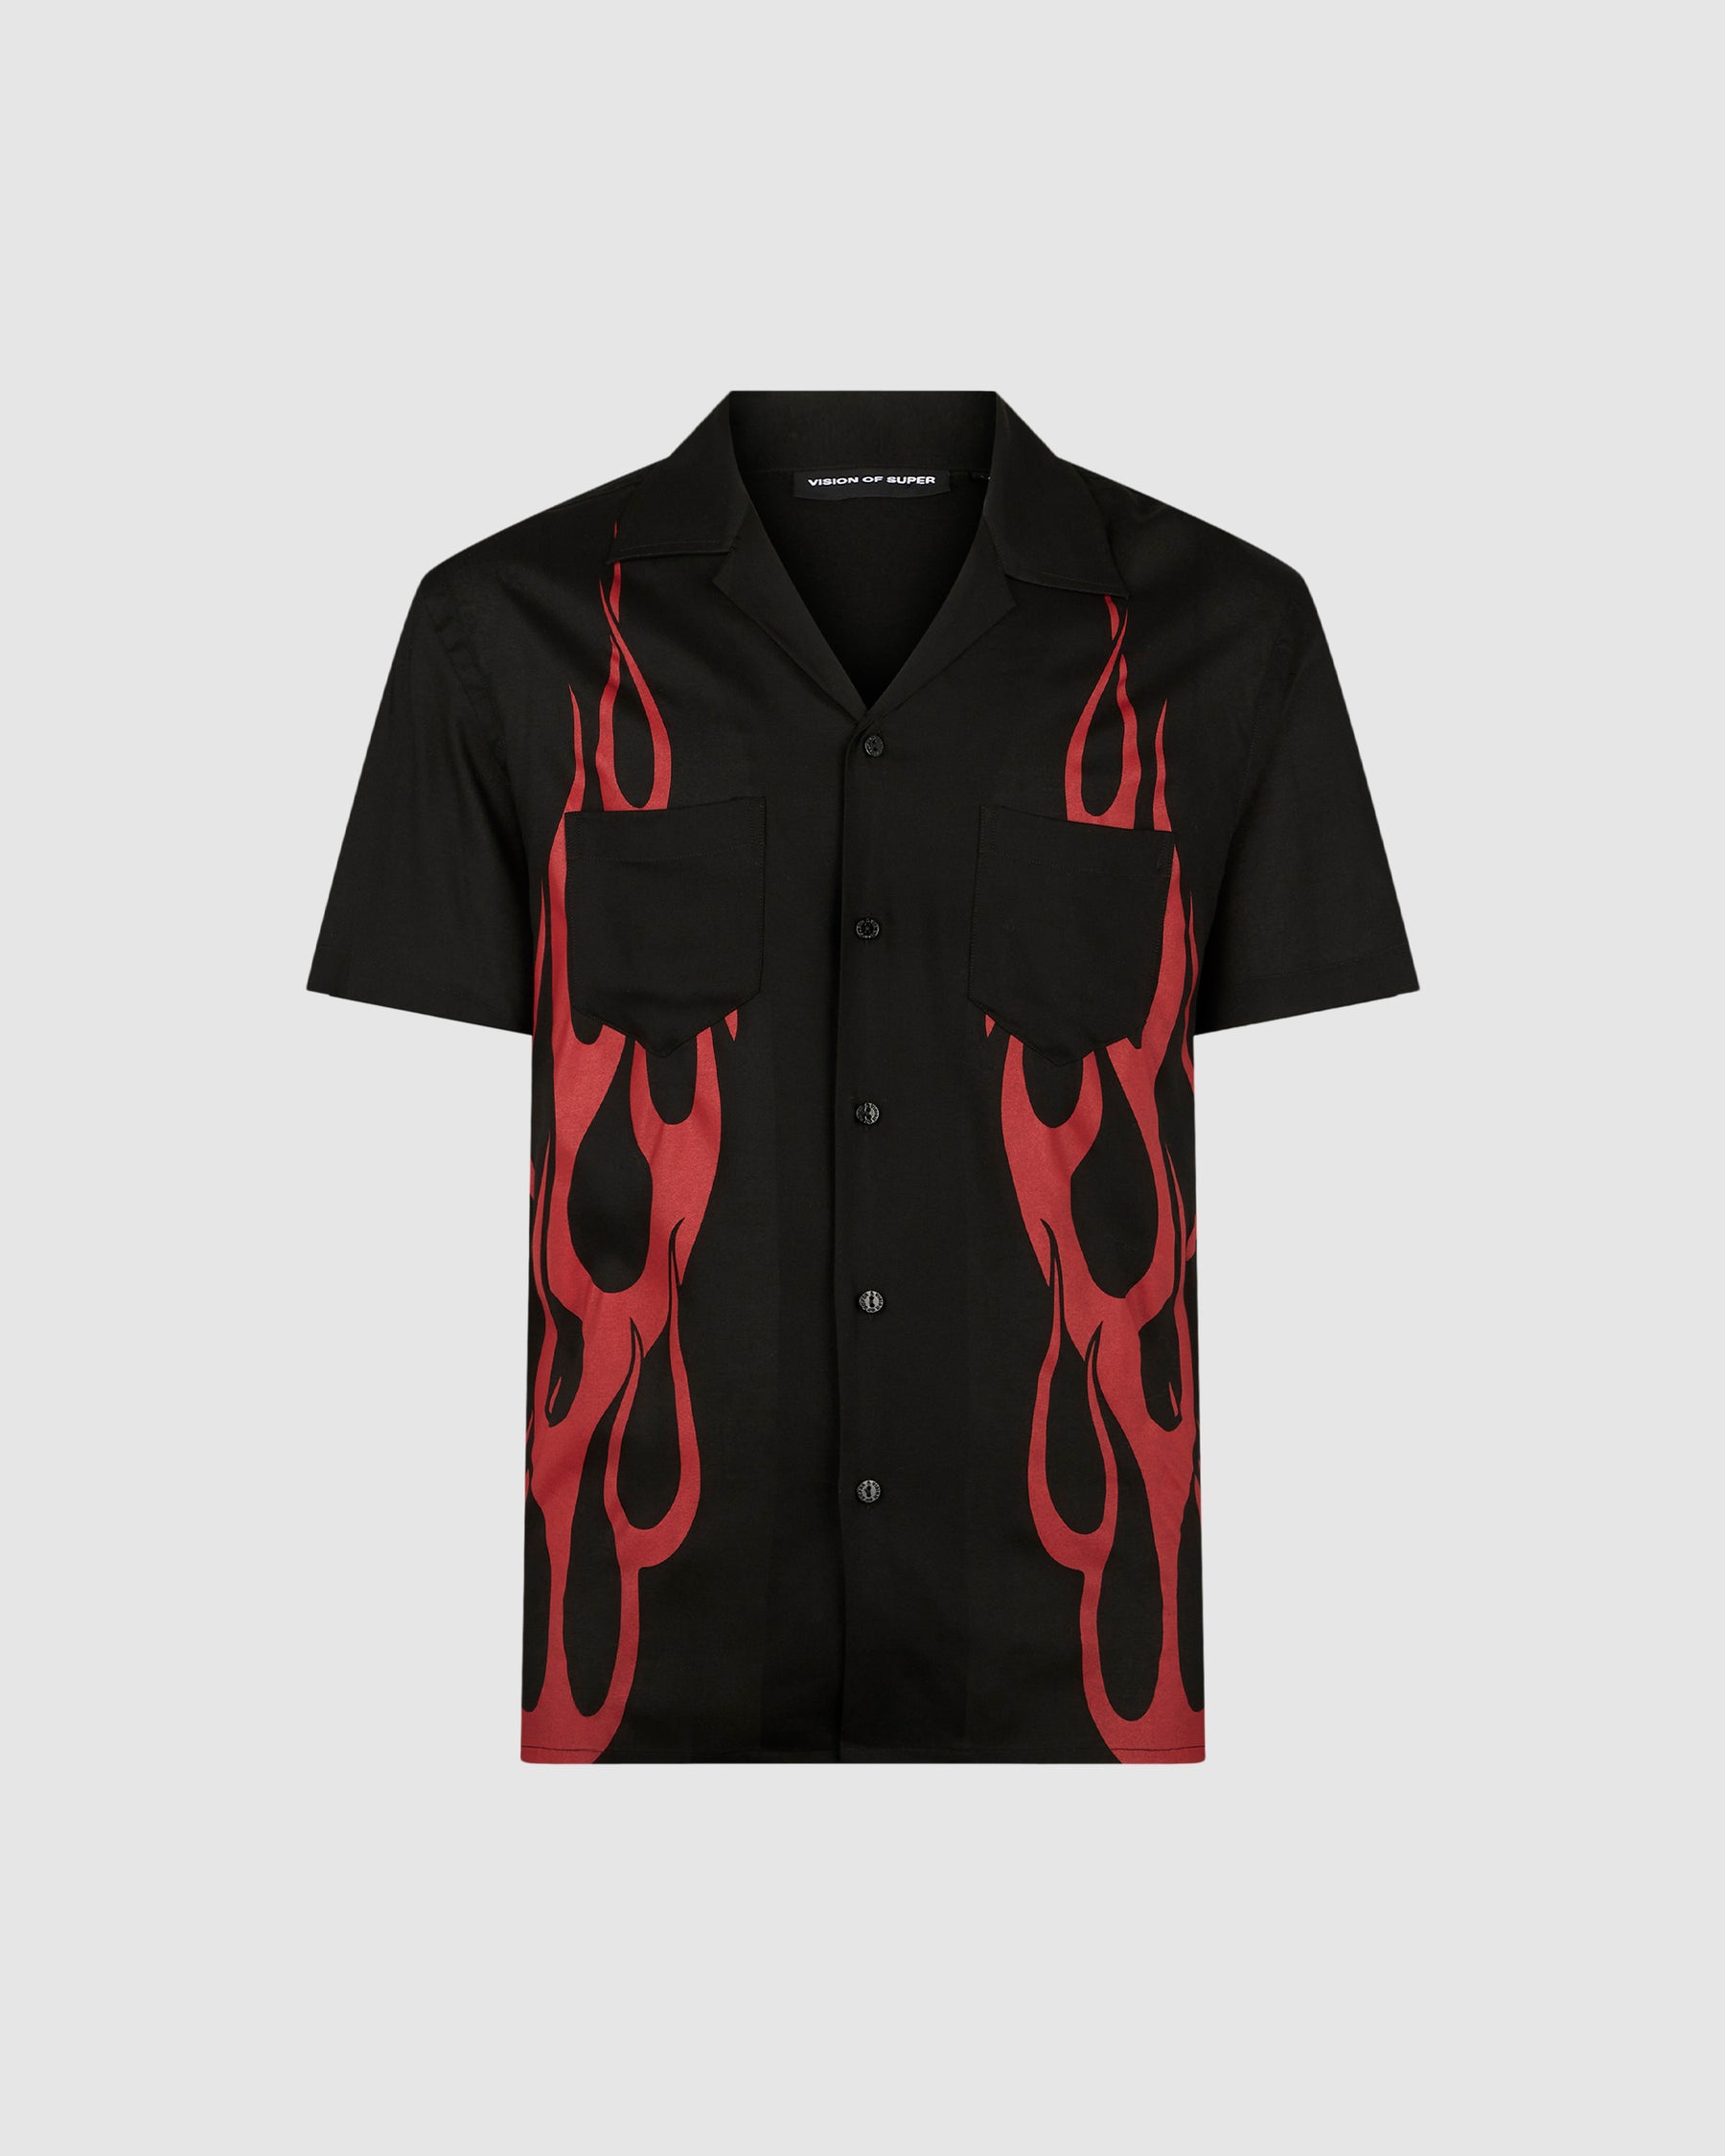 VISION OF SUPER BLACK SHIRT WITH RED FLAMES